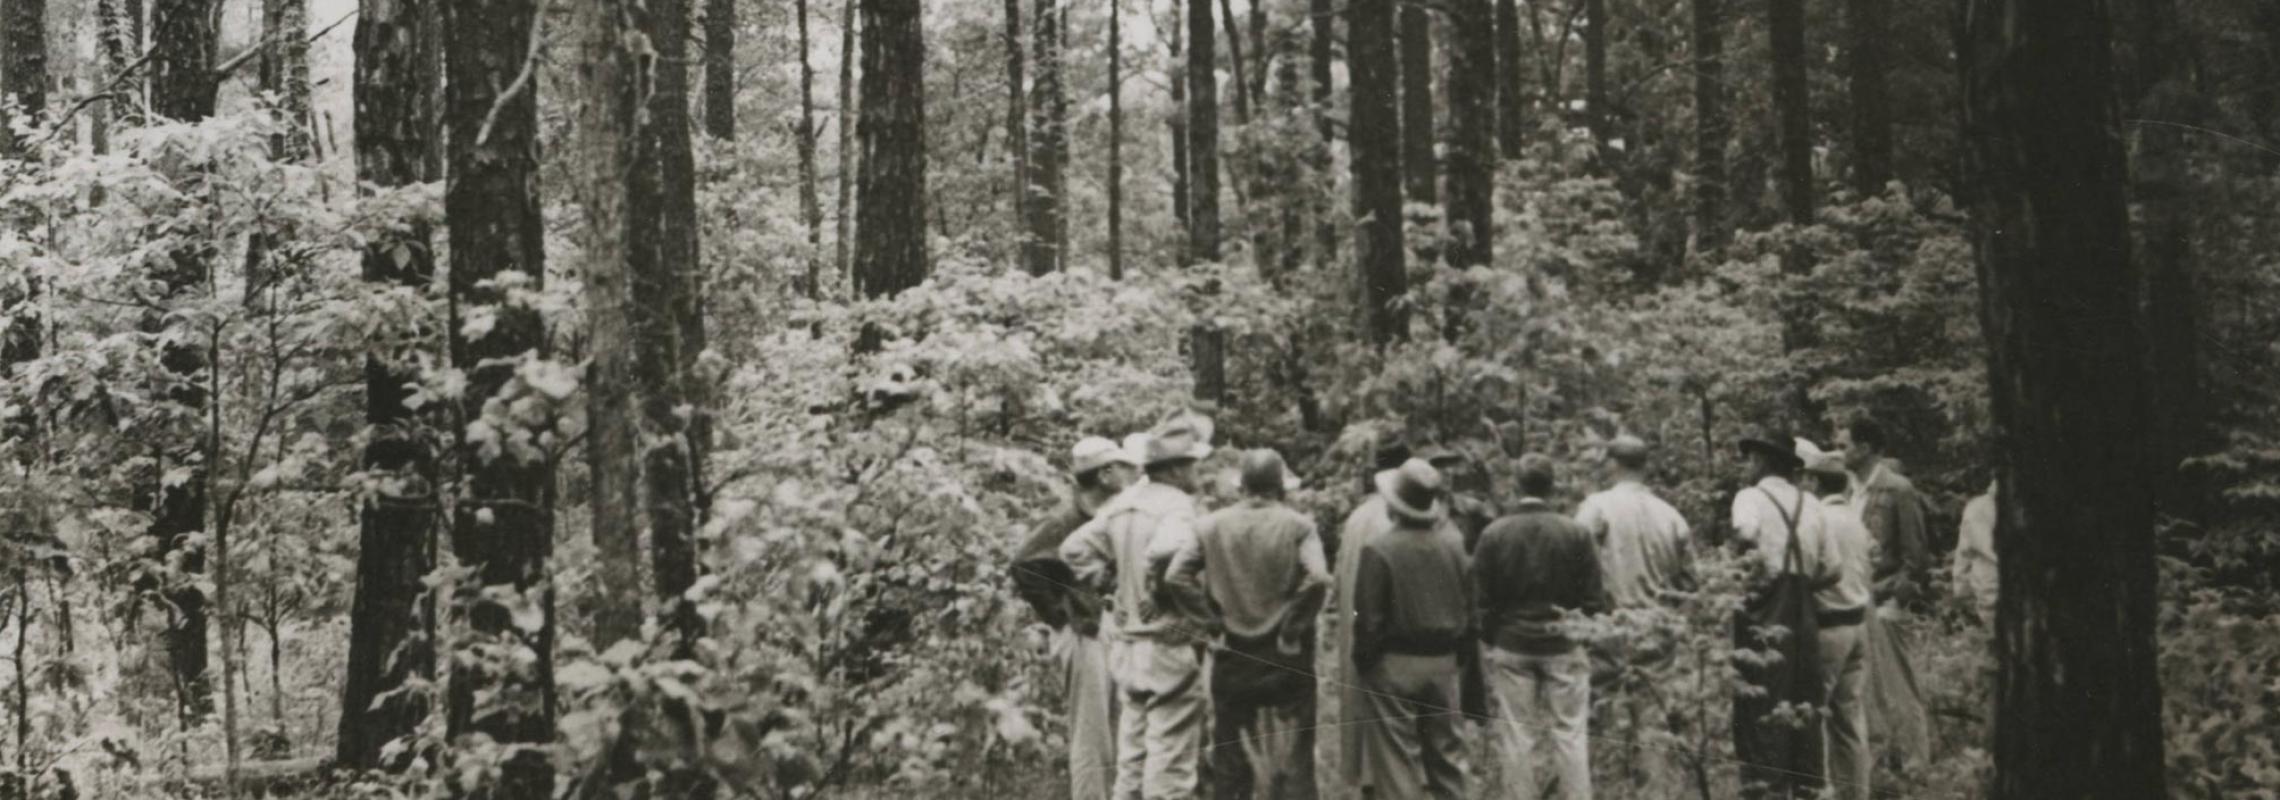 B&W photo of a forest with a group of people below tall trees